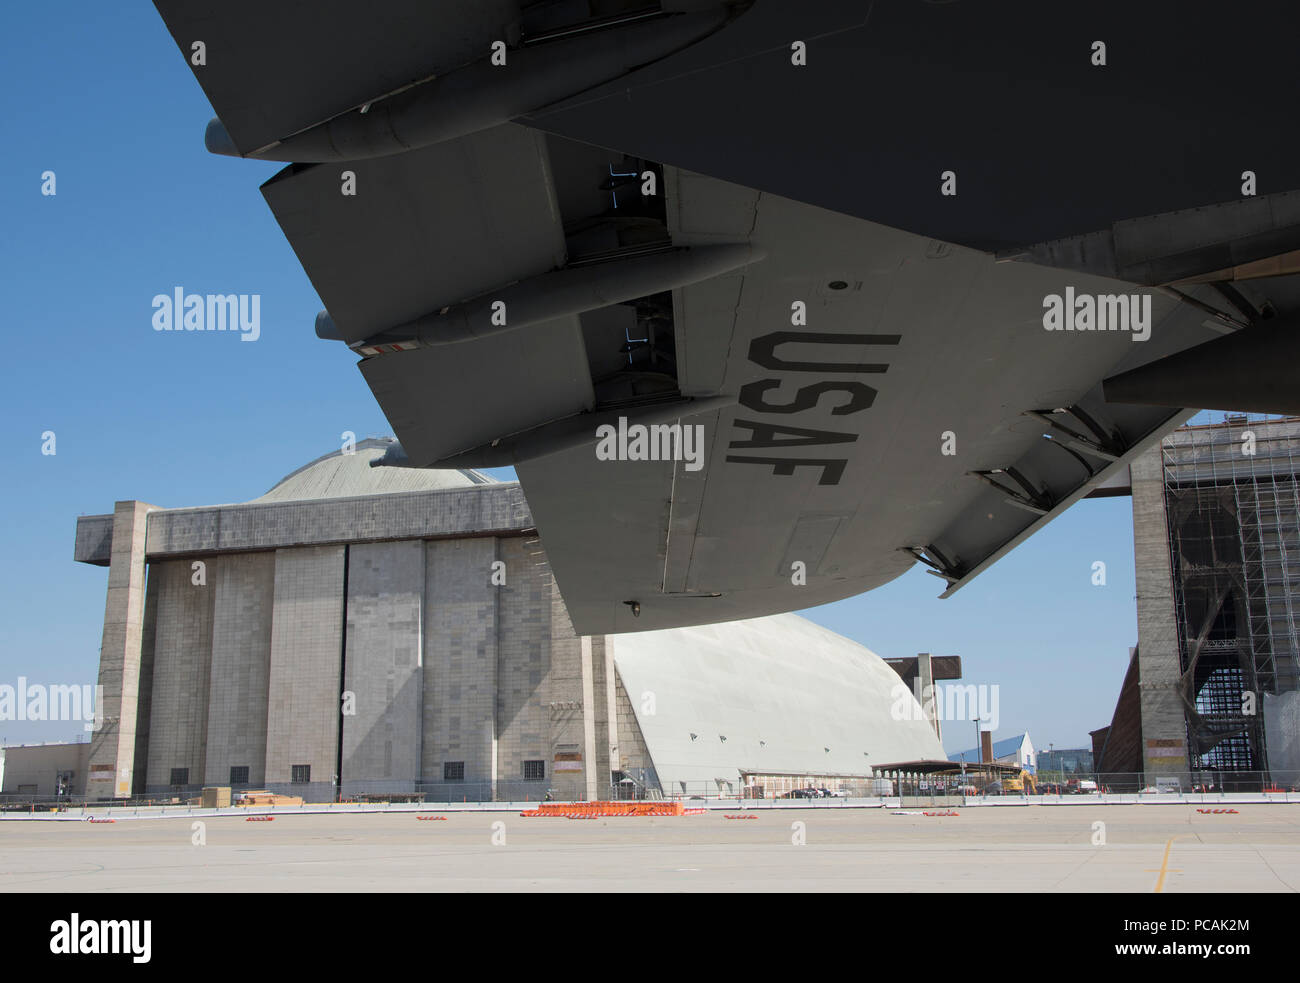 A U.S. Air Force C-5M Super Galaxy from Travis Air Force Base, Calif., is parked on the ramp in front of the huge hangers once used to house the Goodyear Blimp program, July 26, 2018, Moffett Federal Airfield, Calif. The C-5 is one of the largest aircraft in the world and the largest airlifter in the Air Force inventory. (U.S. Air Force Photo by Heide Couch) Stock Photo